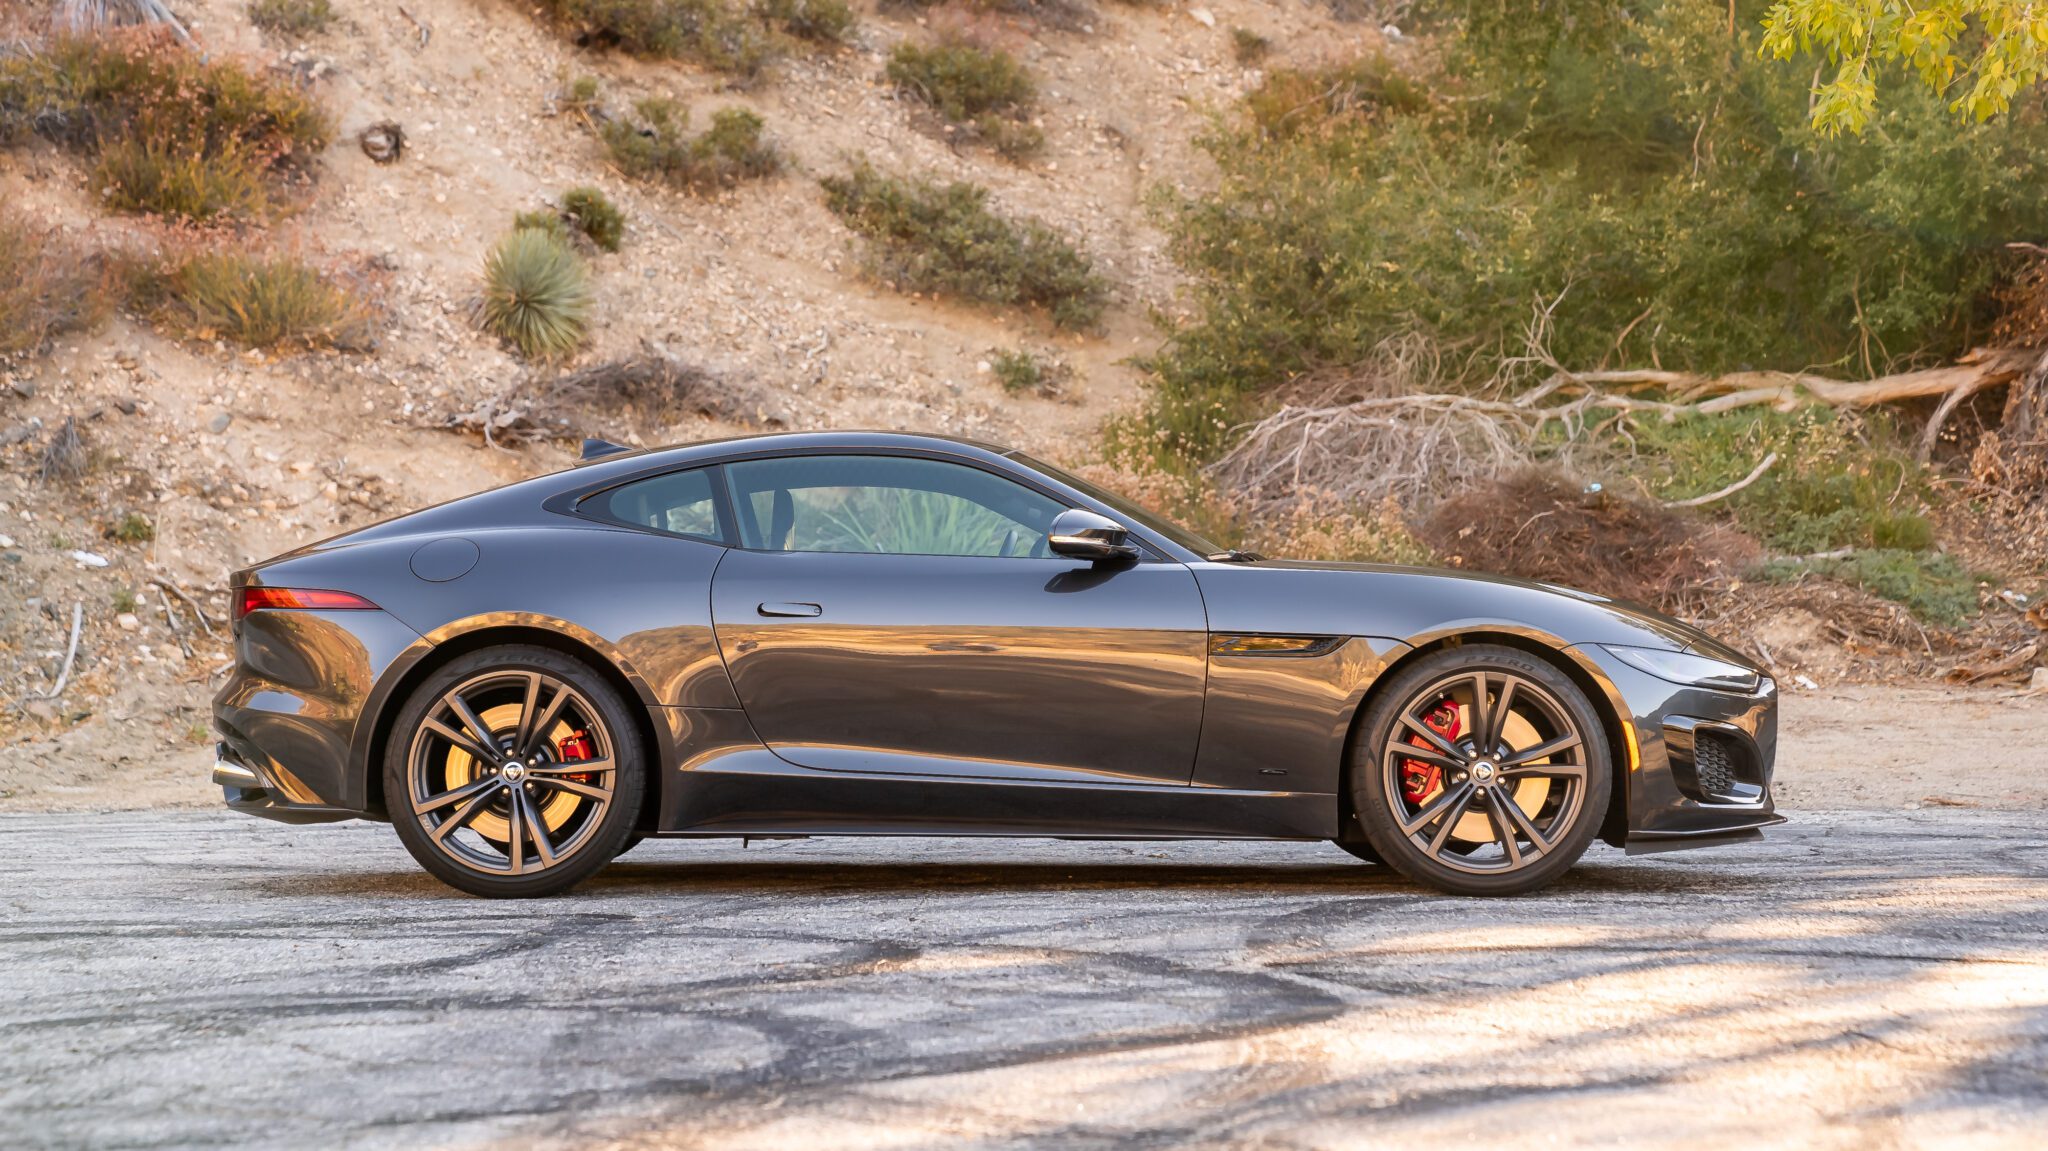 An image of a Jaguar F-Type R parked outdoors.